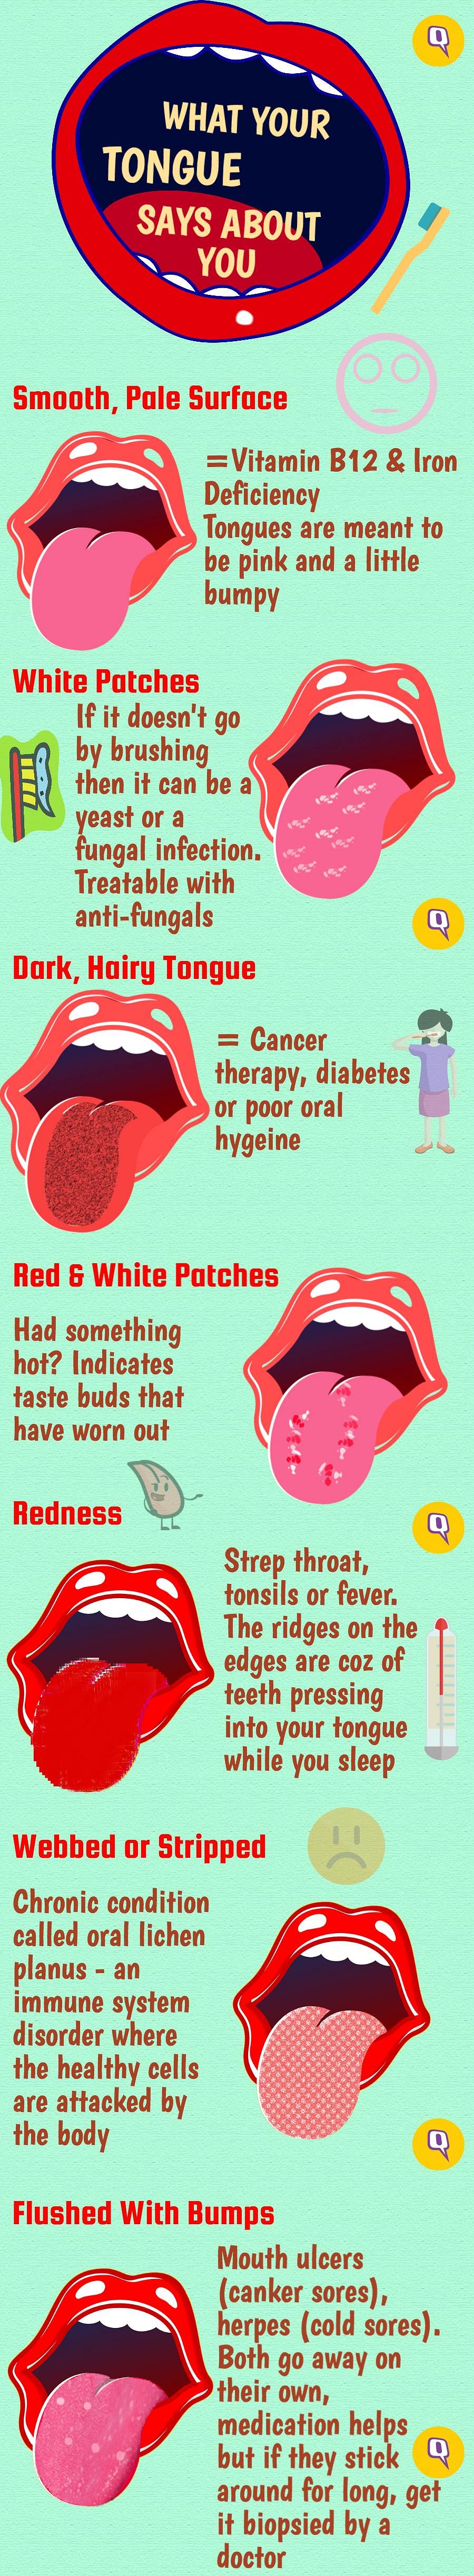 Watch Your Mouth! Your Tongue Says a Lot About Your Health